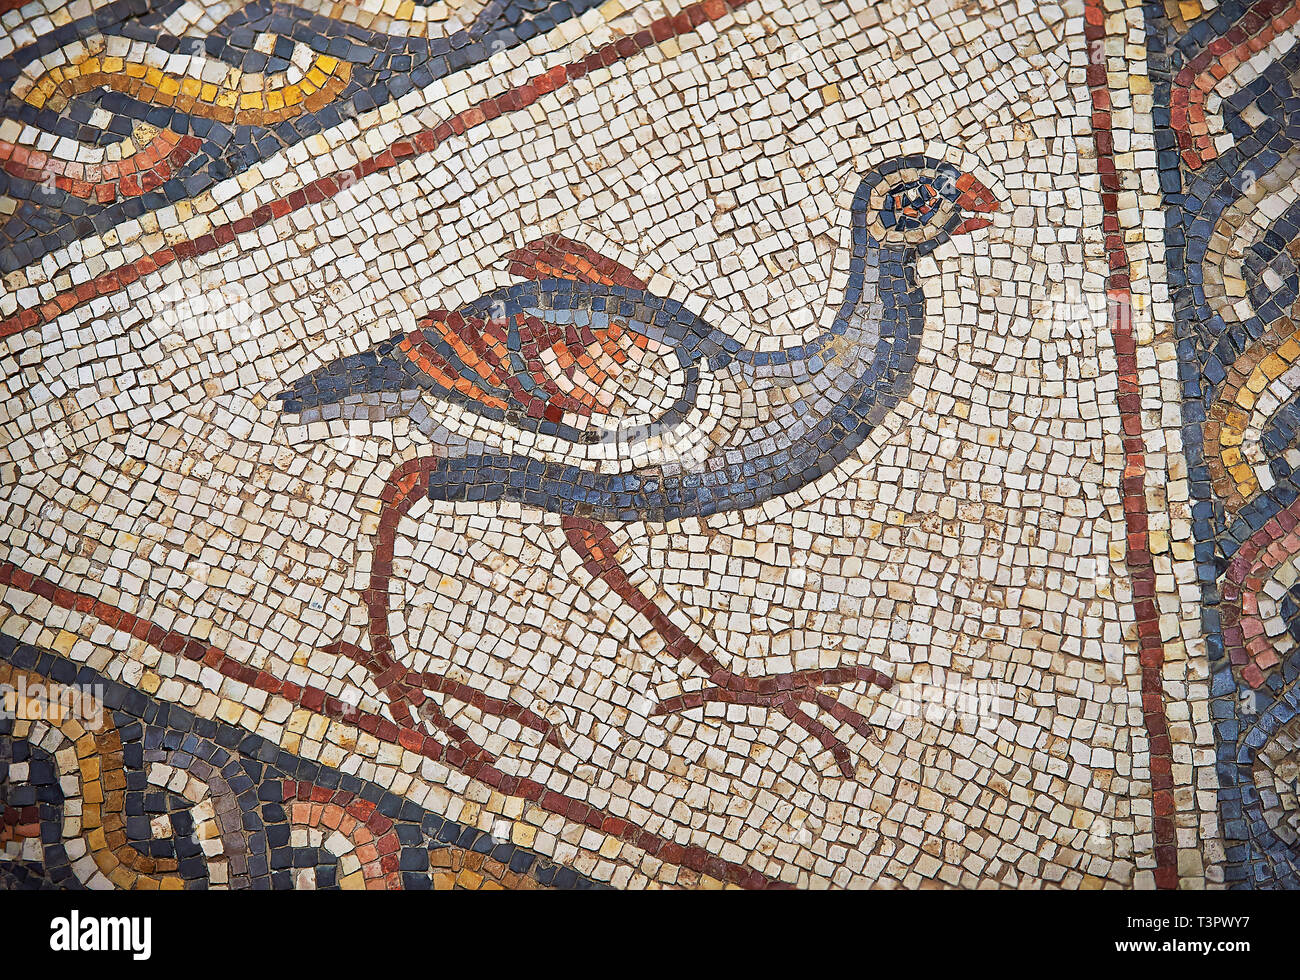 https://c8.alamy.com/comp/T3PWY7/a-bird-from-the-3rd-century-roman-mosaic-villa-floor-from-lod-near-tel-aviv-israel-the-roman-floor-mosaic-of-lod-is-the-largest-and-best-preserved-T3PWY7.jpg